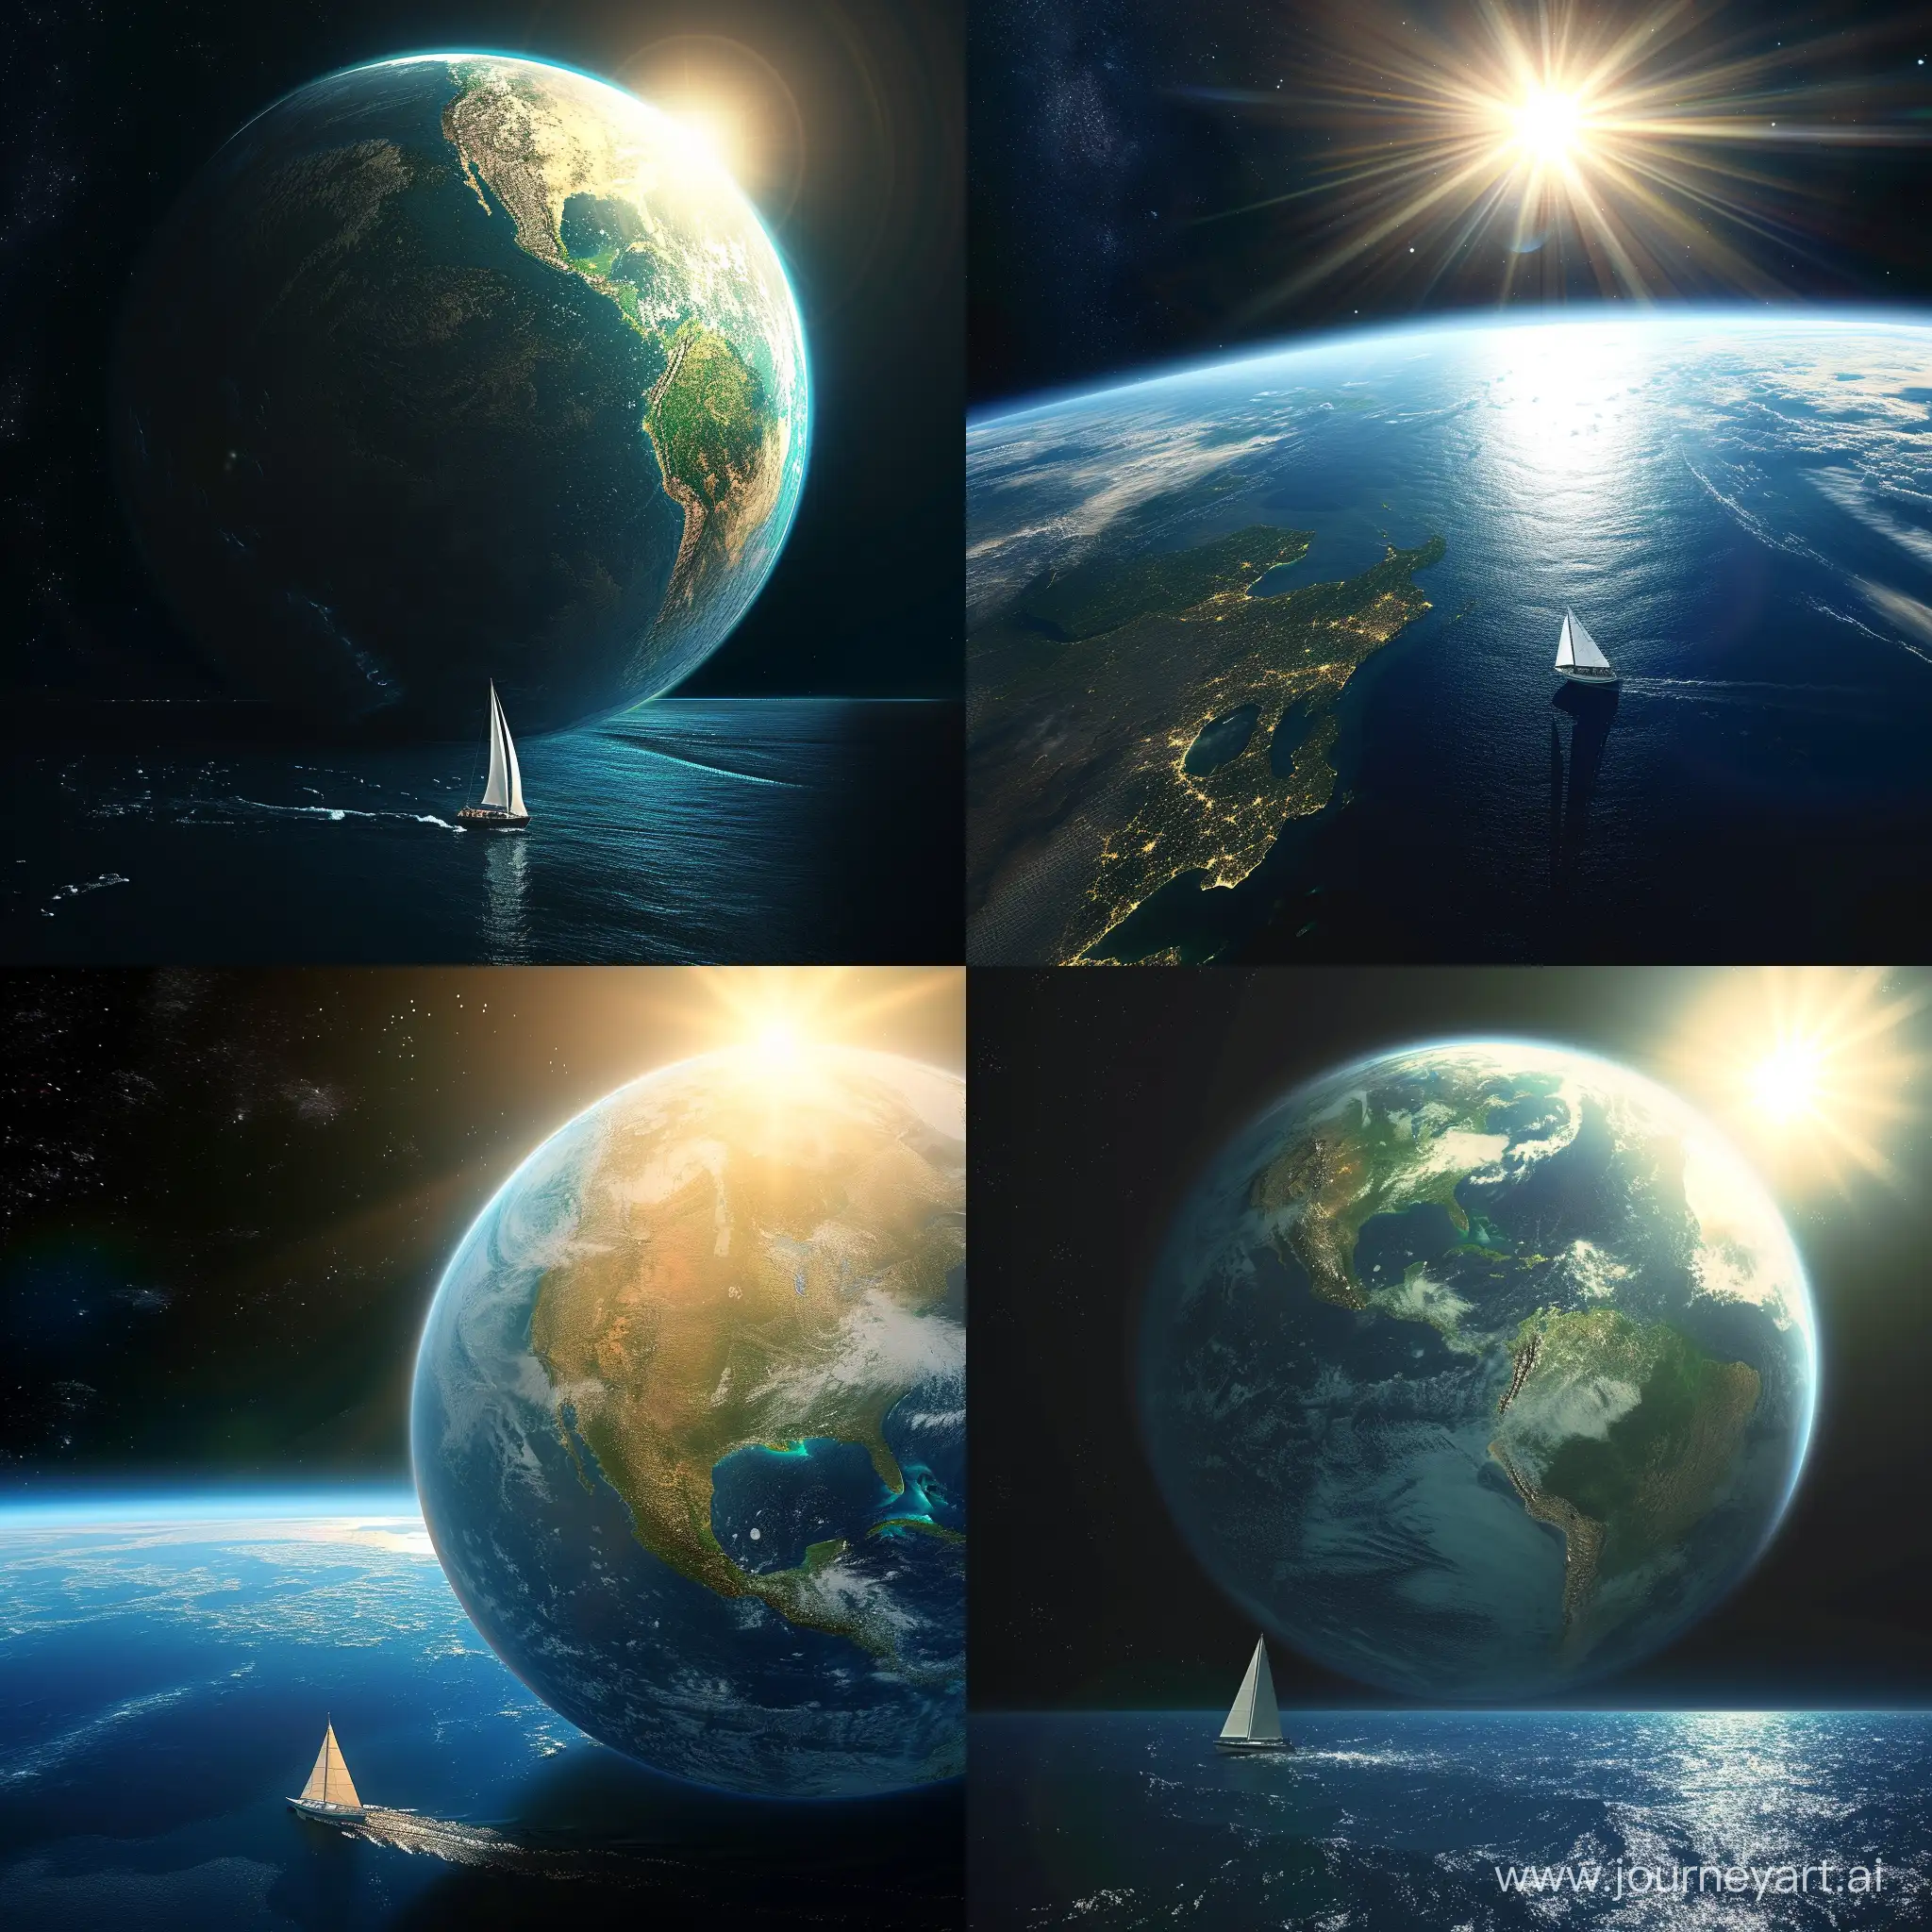 Generate an image of the Earth seen from space, with a beautifully rendered boat sailing on an ocean at the lower part of the composition. The sunlight highlights the Earth's features, and the boat adds a touch of realism and connection to the vastness of space.